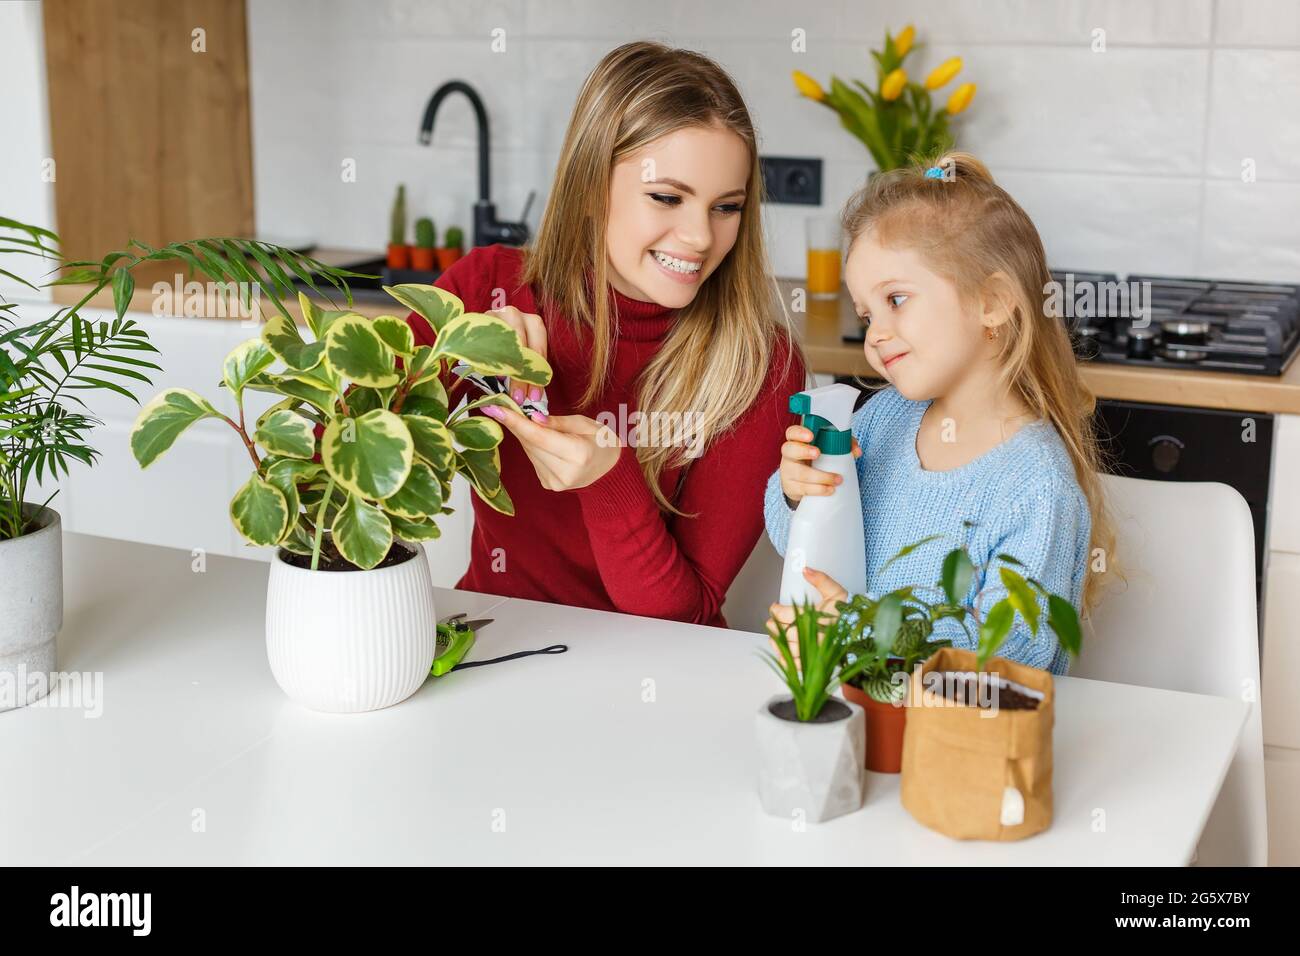 Little daughter and mother spraying and cleaning houseplants at home. Concentrated 3 year old kid helping mom to care plants. Concept of hobby, presch Stock Photo